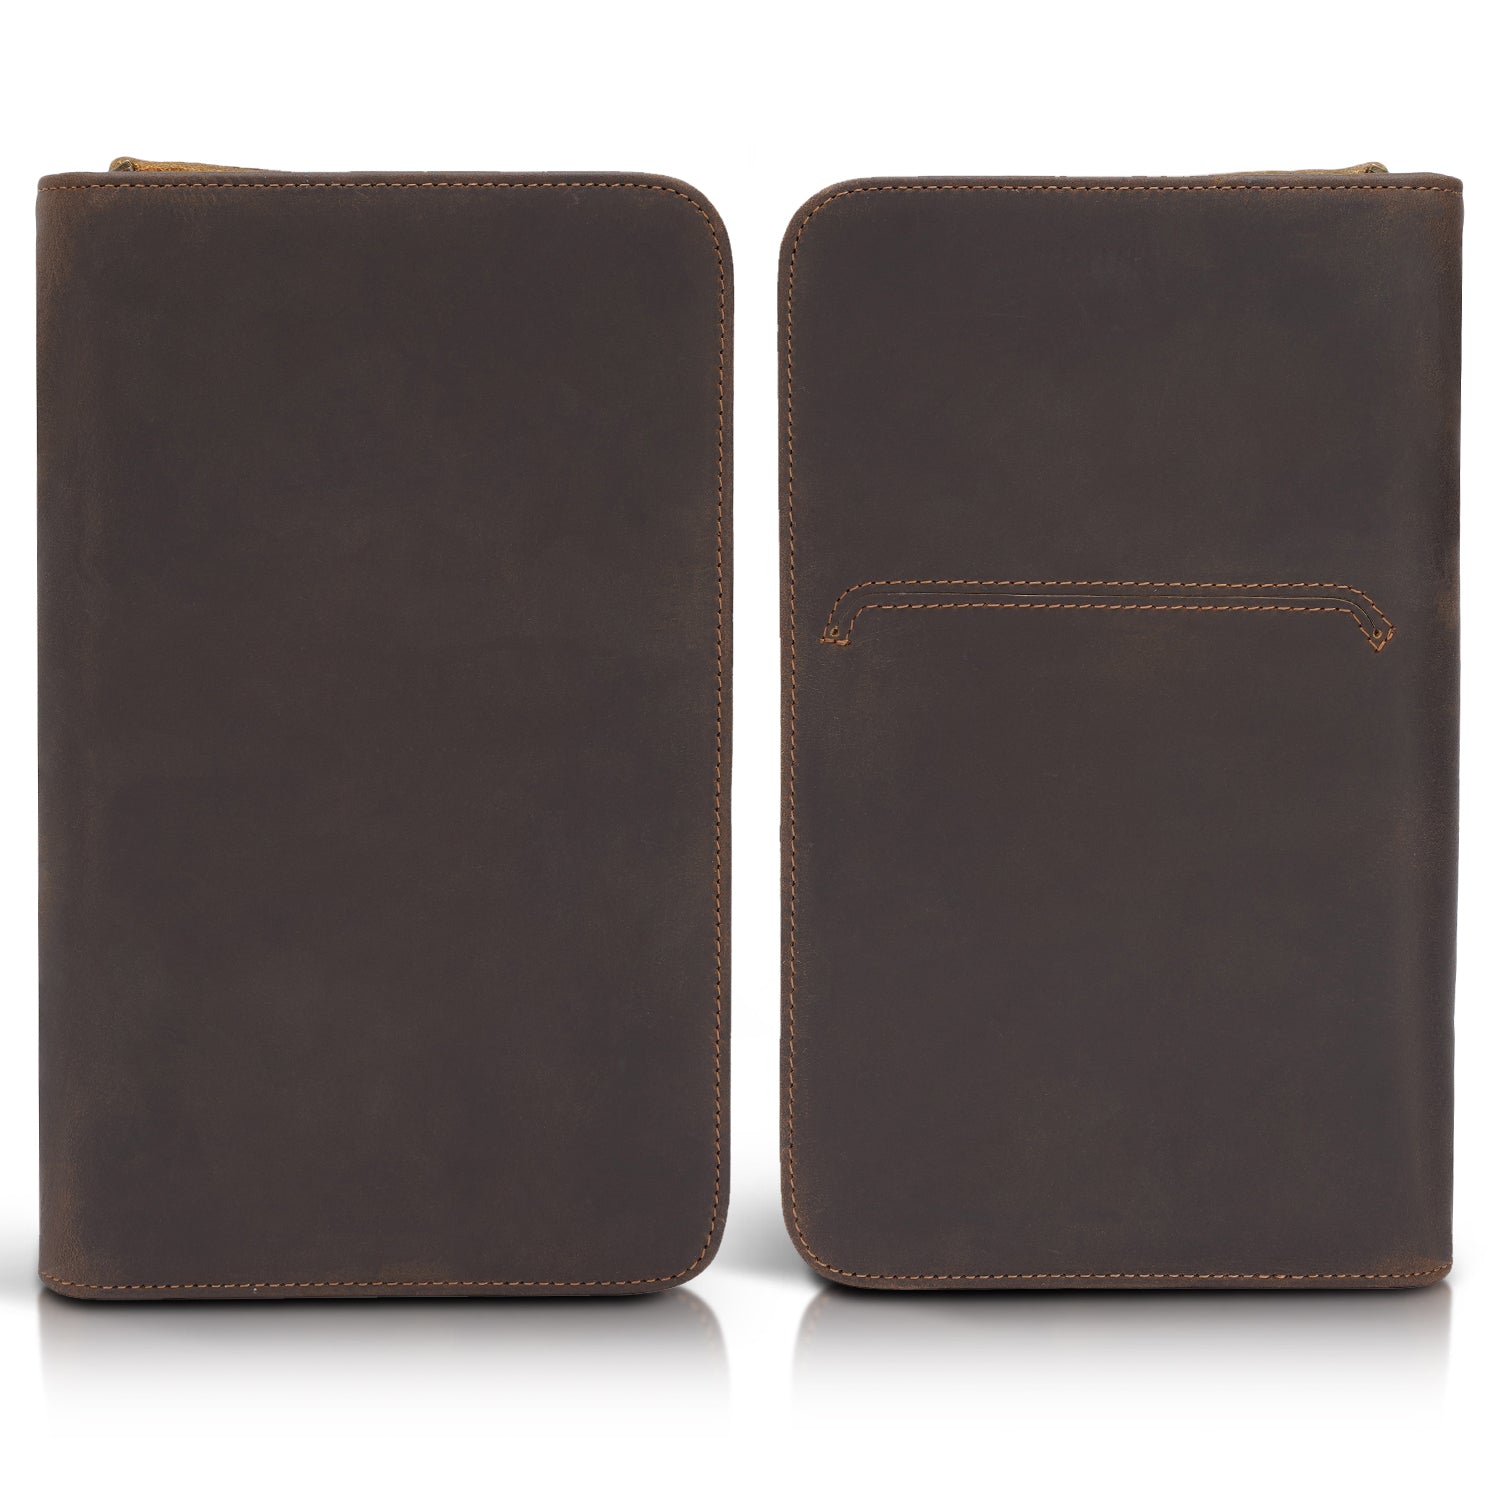 Polare Leather Passport Holder Cover Case (Dark Brown,Front and Back)